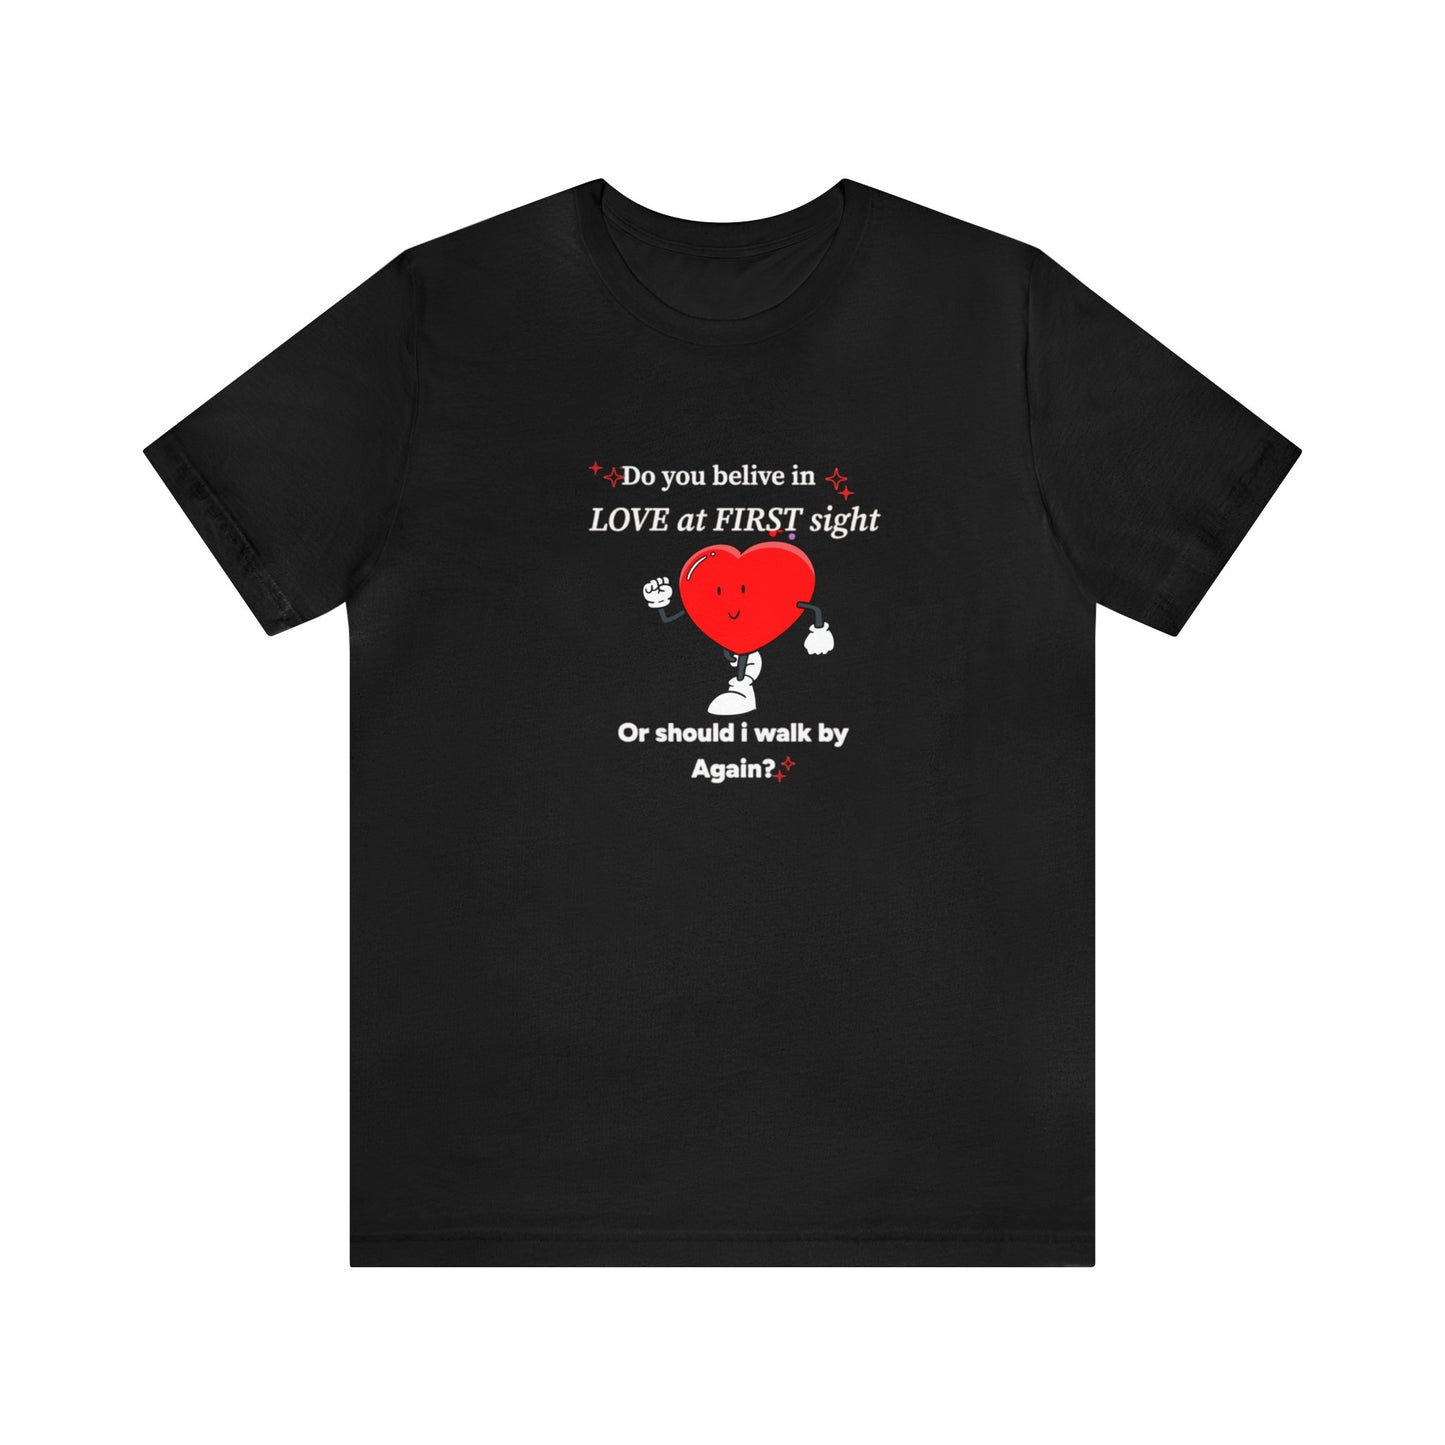 "Captivating Cupid's Charm: Embrace Love at First Sight with Our Exclusive Valentine's Day T-Shirt Design"